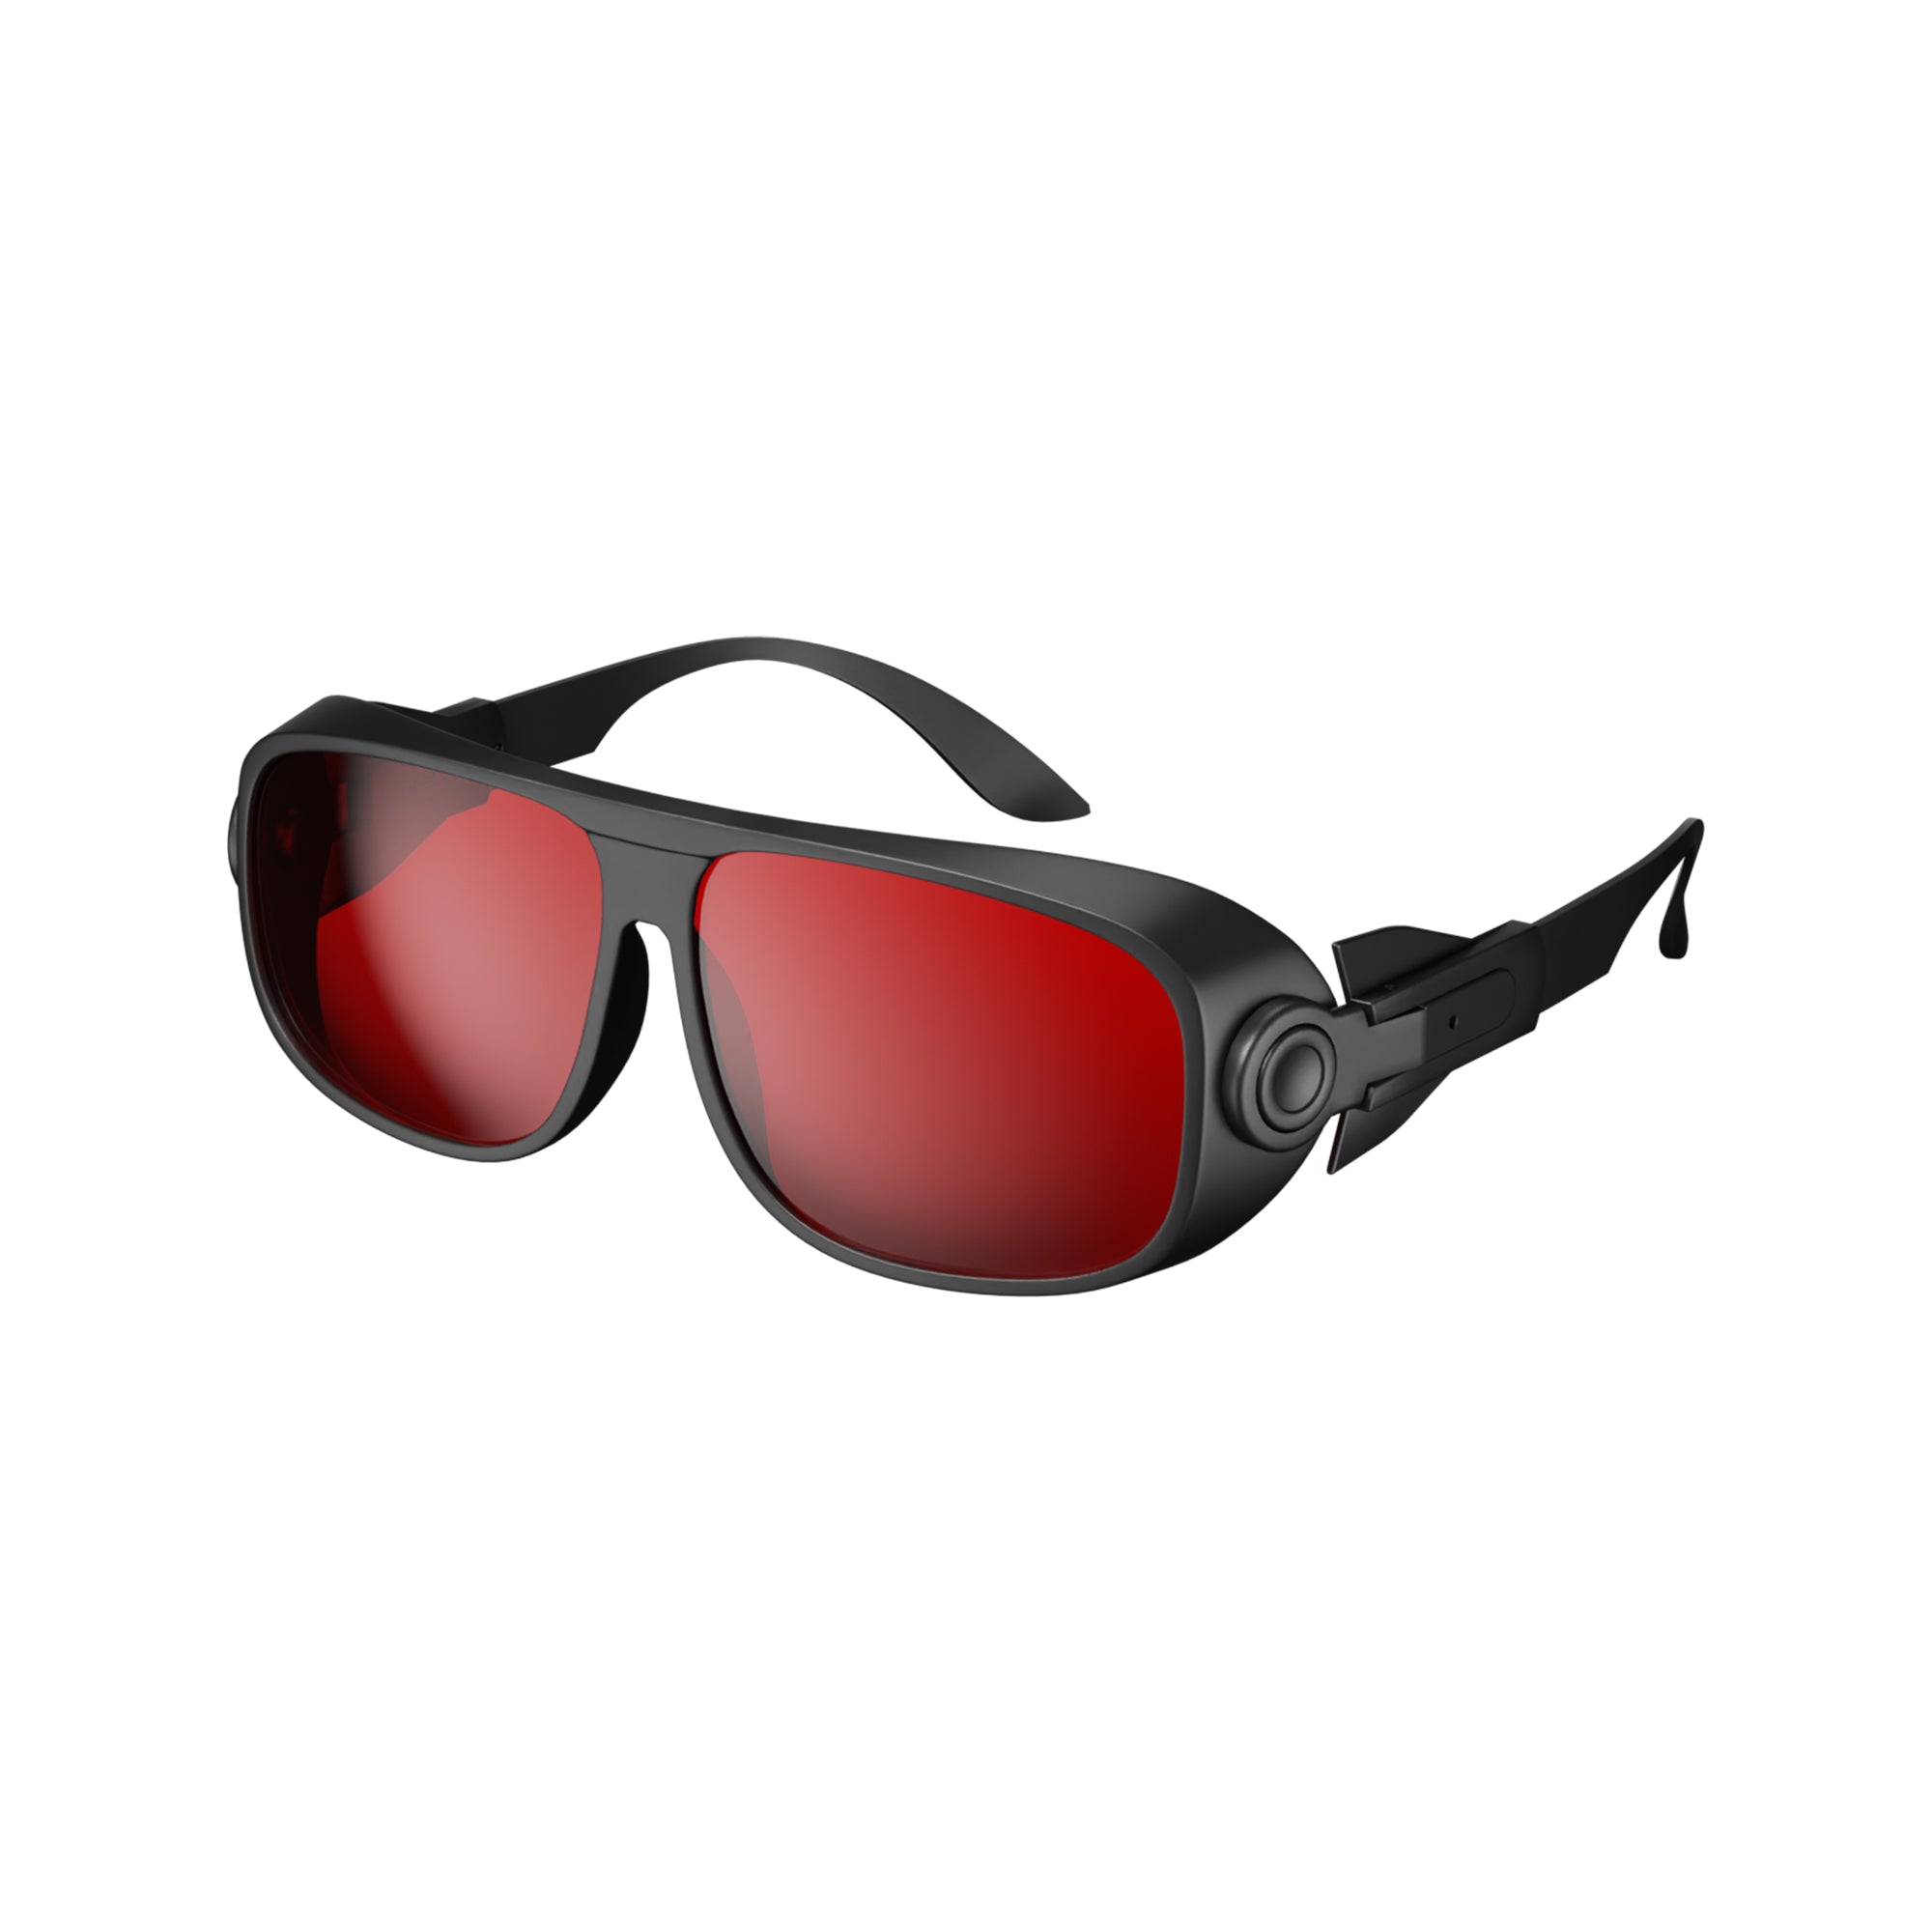 Ortur Safety Laser Goggles with 180-540nm Wavelength Protection